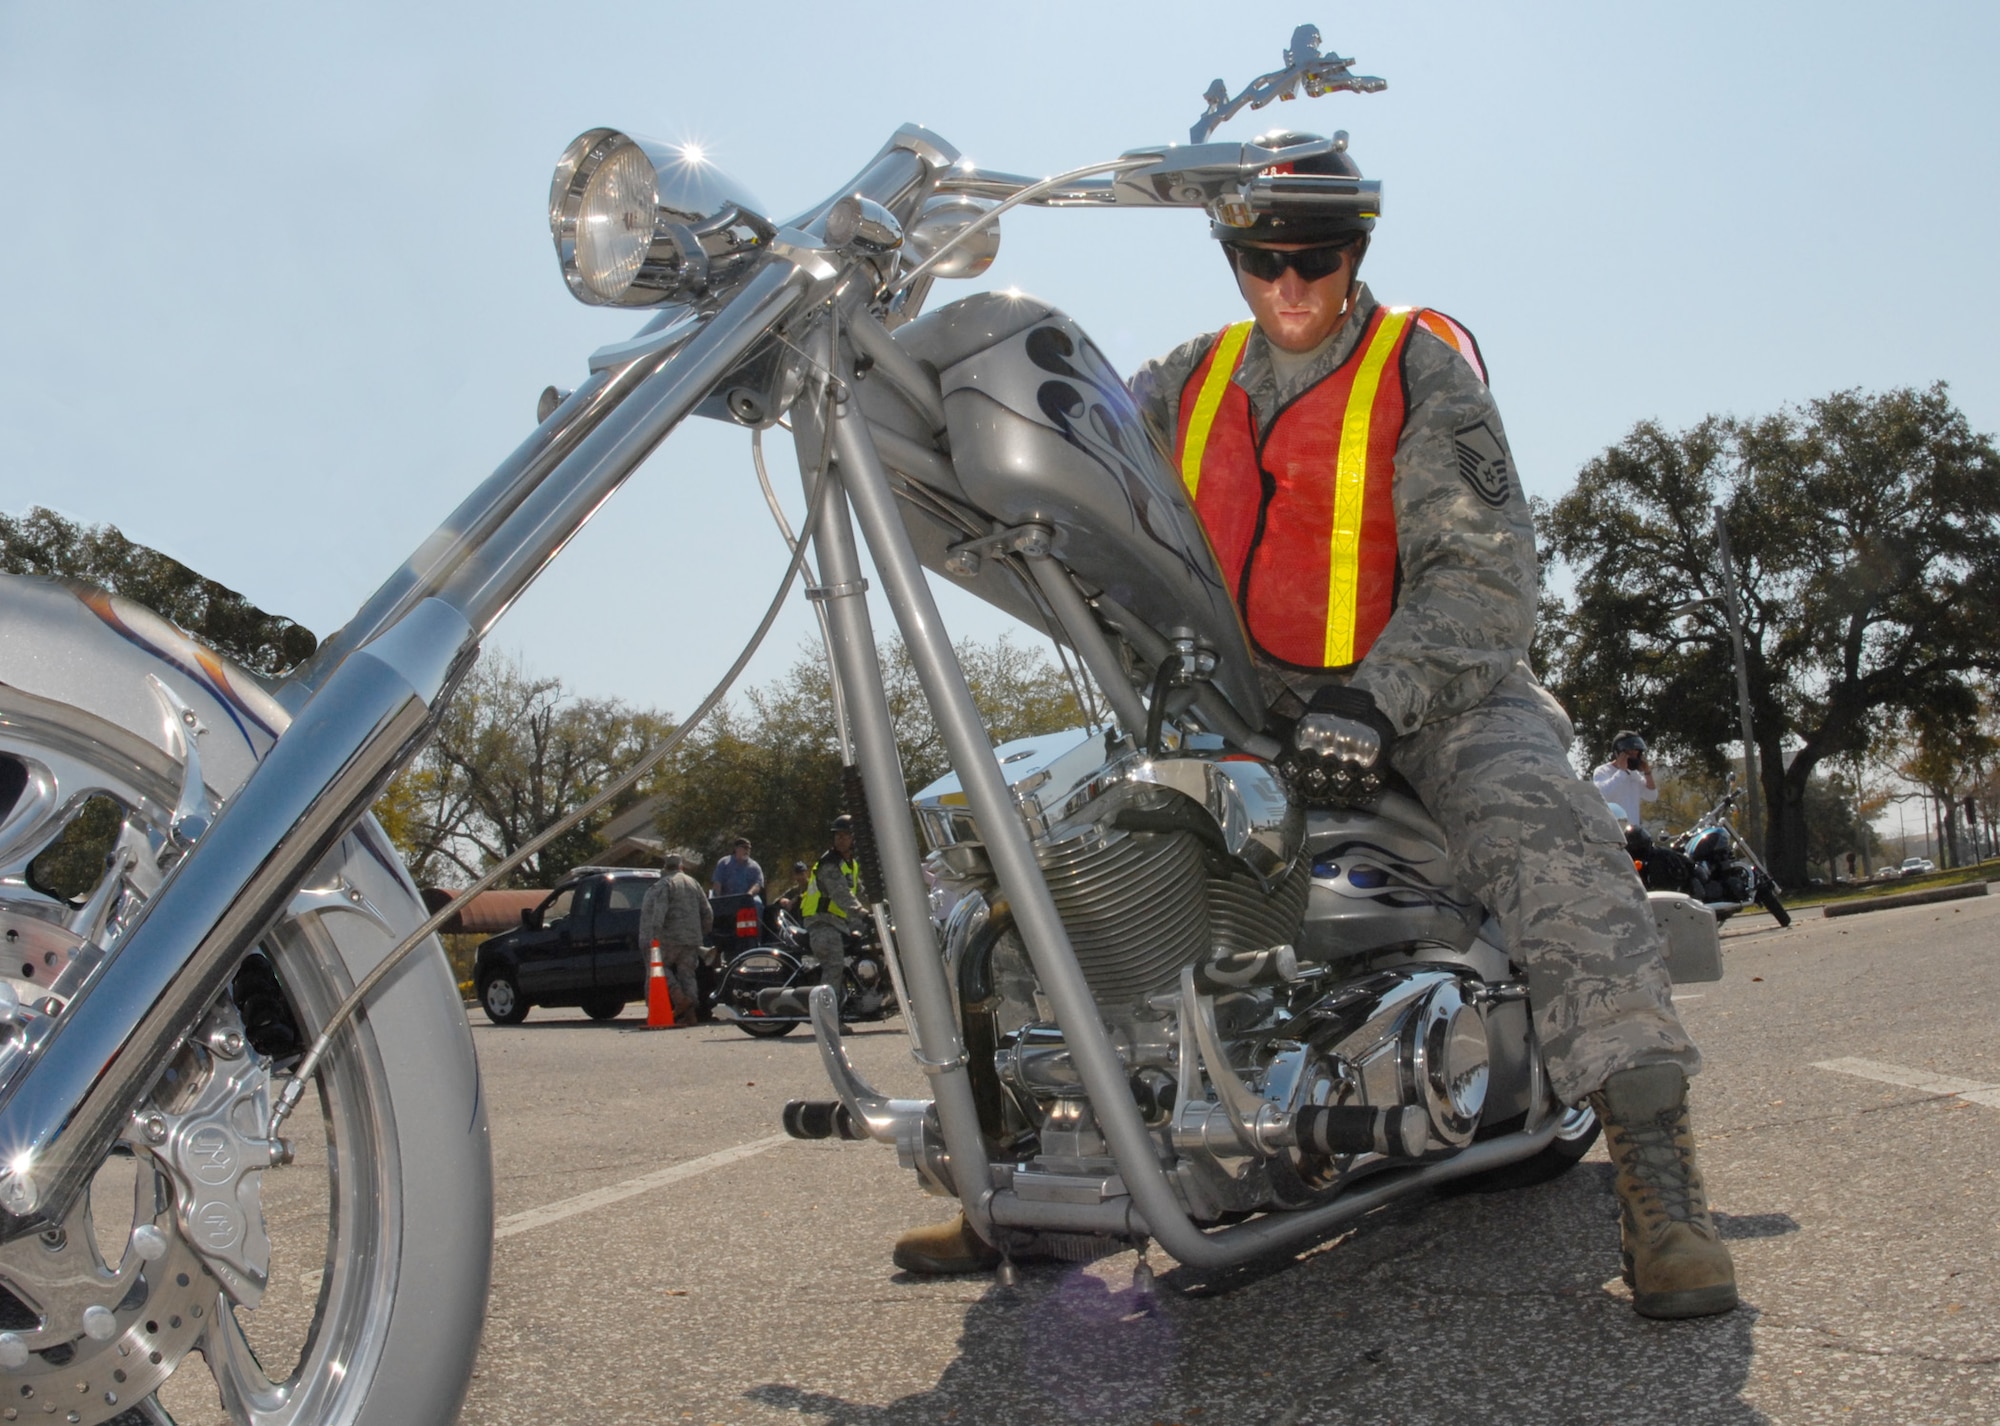 Master Sgt. Chad Wilkey, 96th Logistics Readiness Squadron, adjusts his 'award-winning' custom chopper before the group ride at the Team Eglin Motorcycle Safety Day March 13 at Eglin Air Force Base, Fla. The second annual event brought out approximately 280 riders to participate in safety discussions, riding skills competition and group ride. (Air Force illustration/Samuel King Jr.)